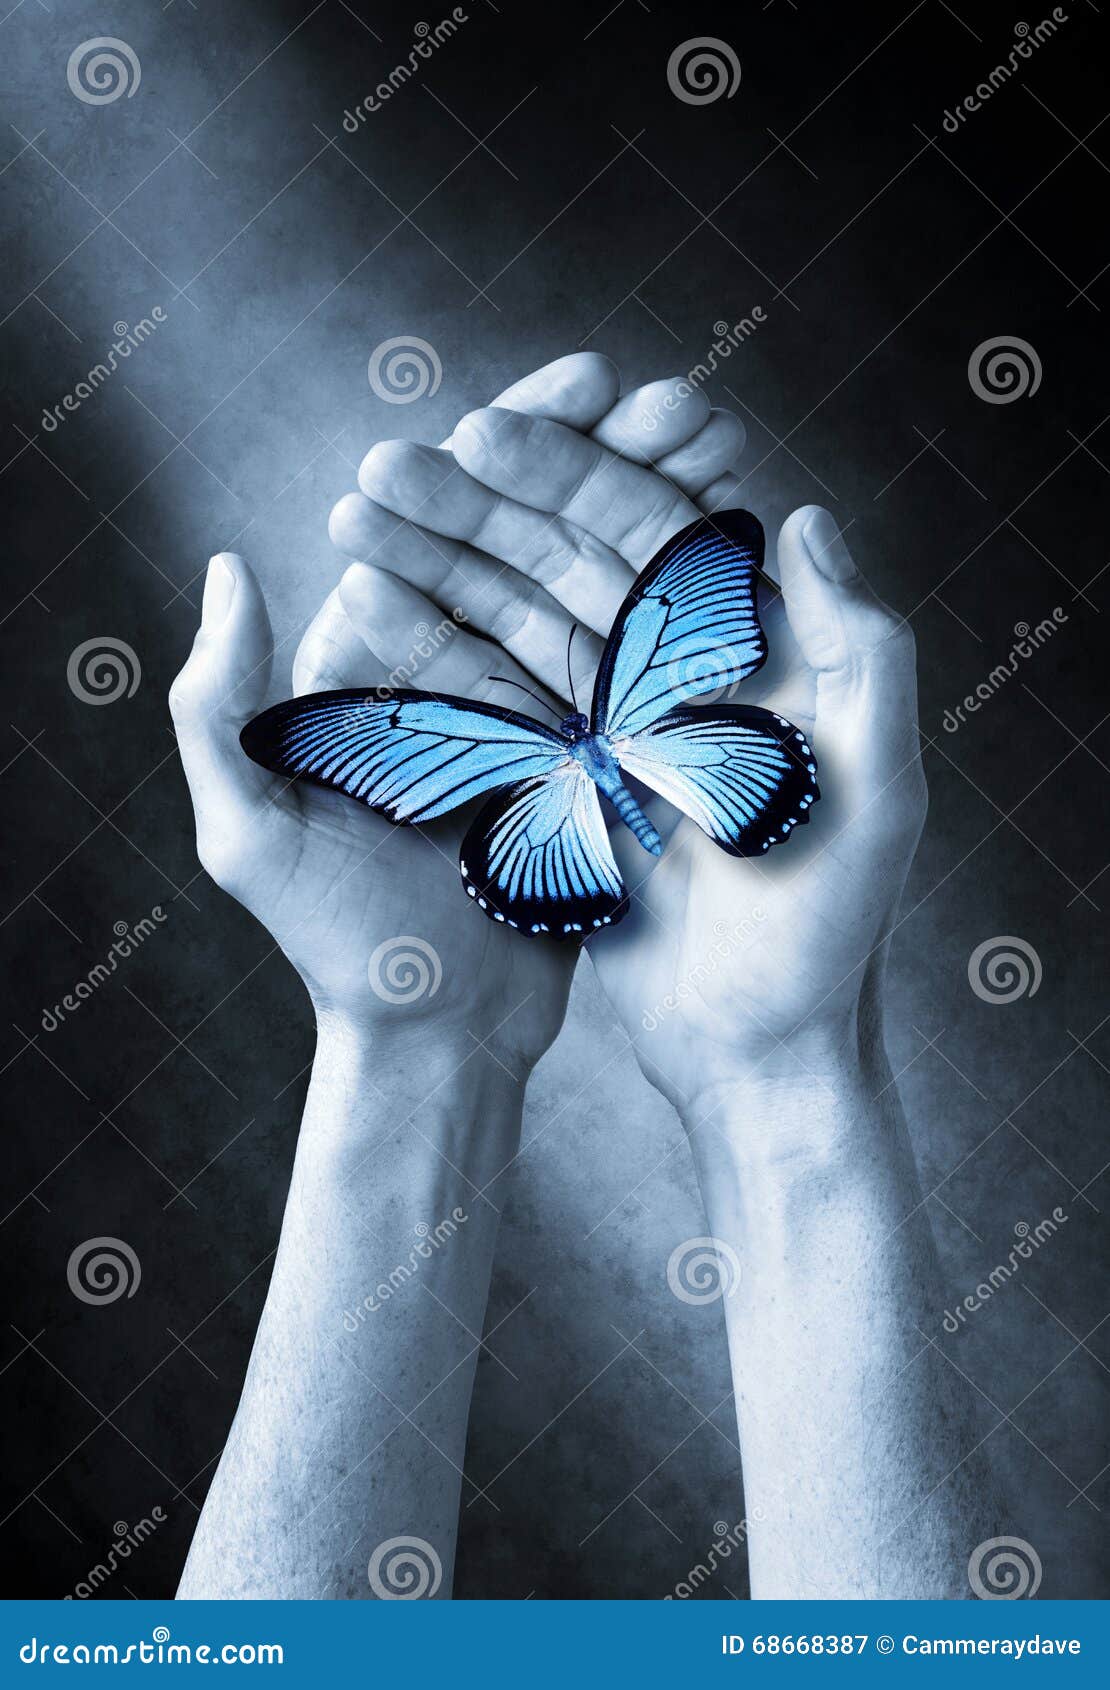 Butterfly Hands Life Love Spirituality Stock Image - Image of ...